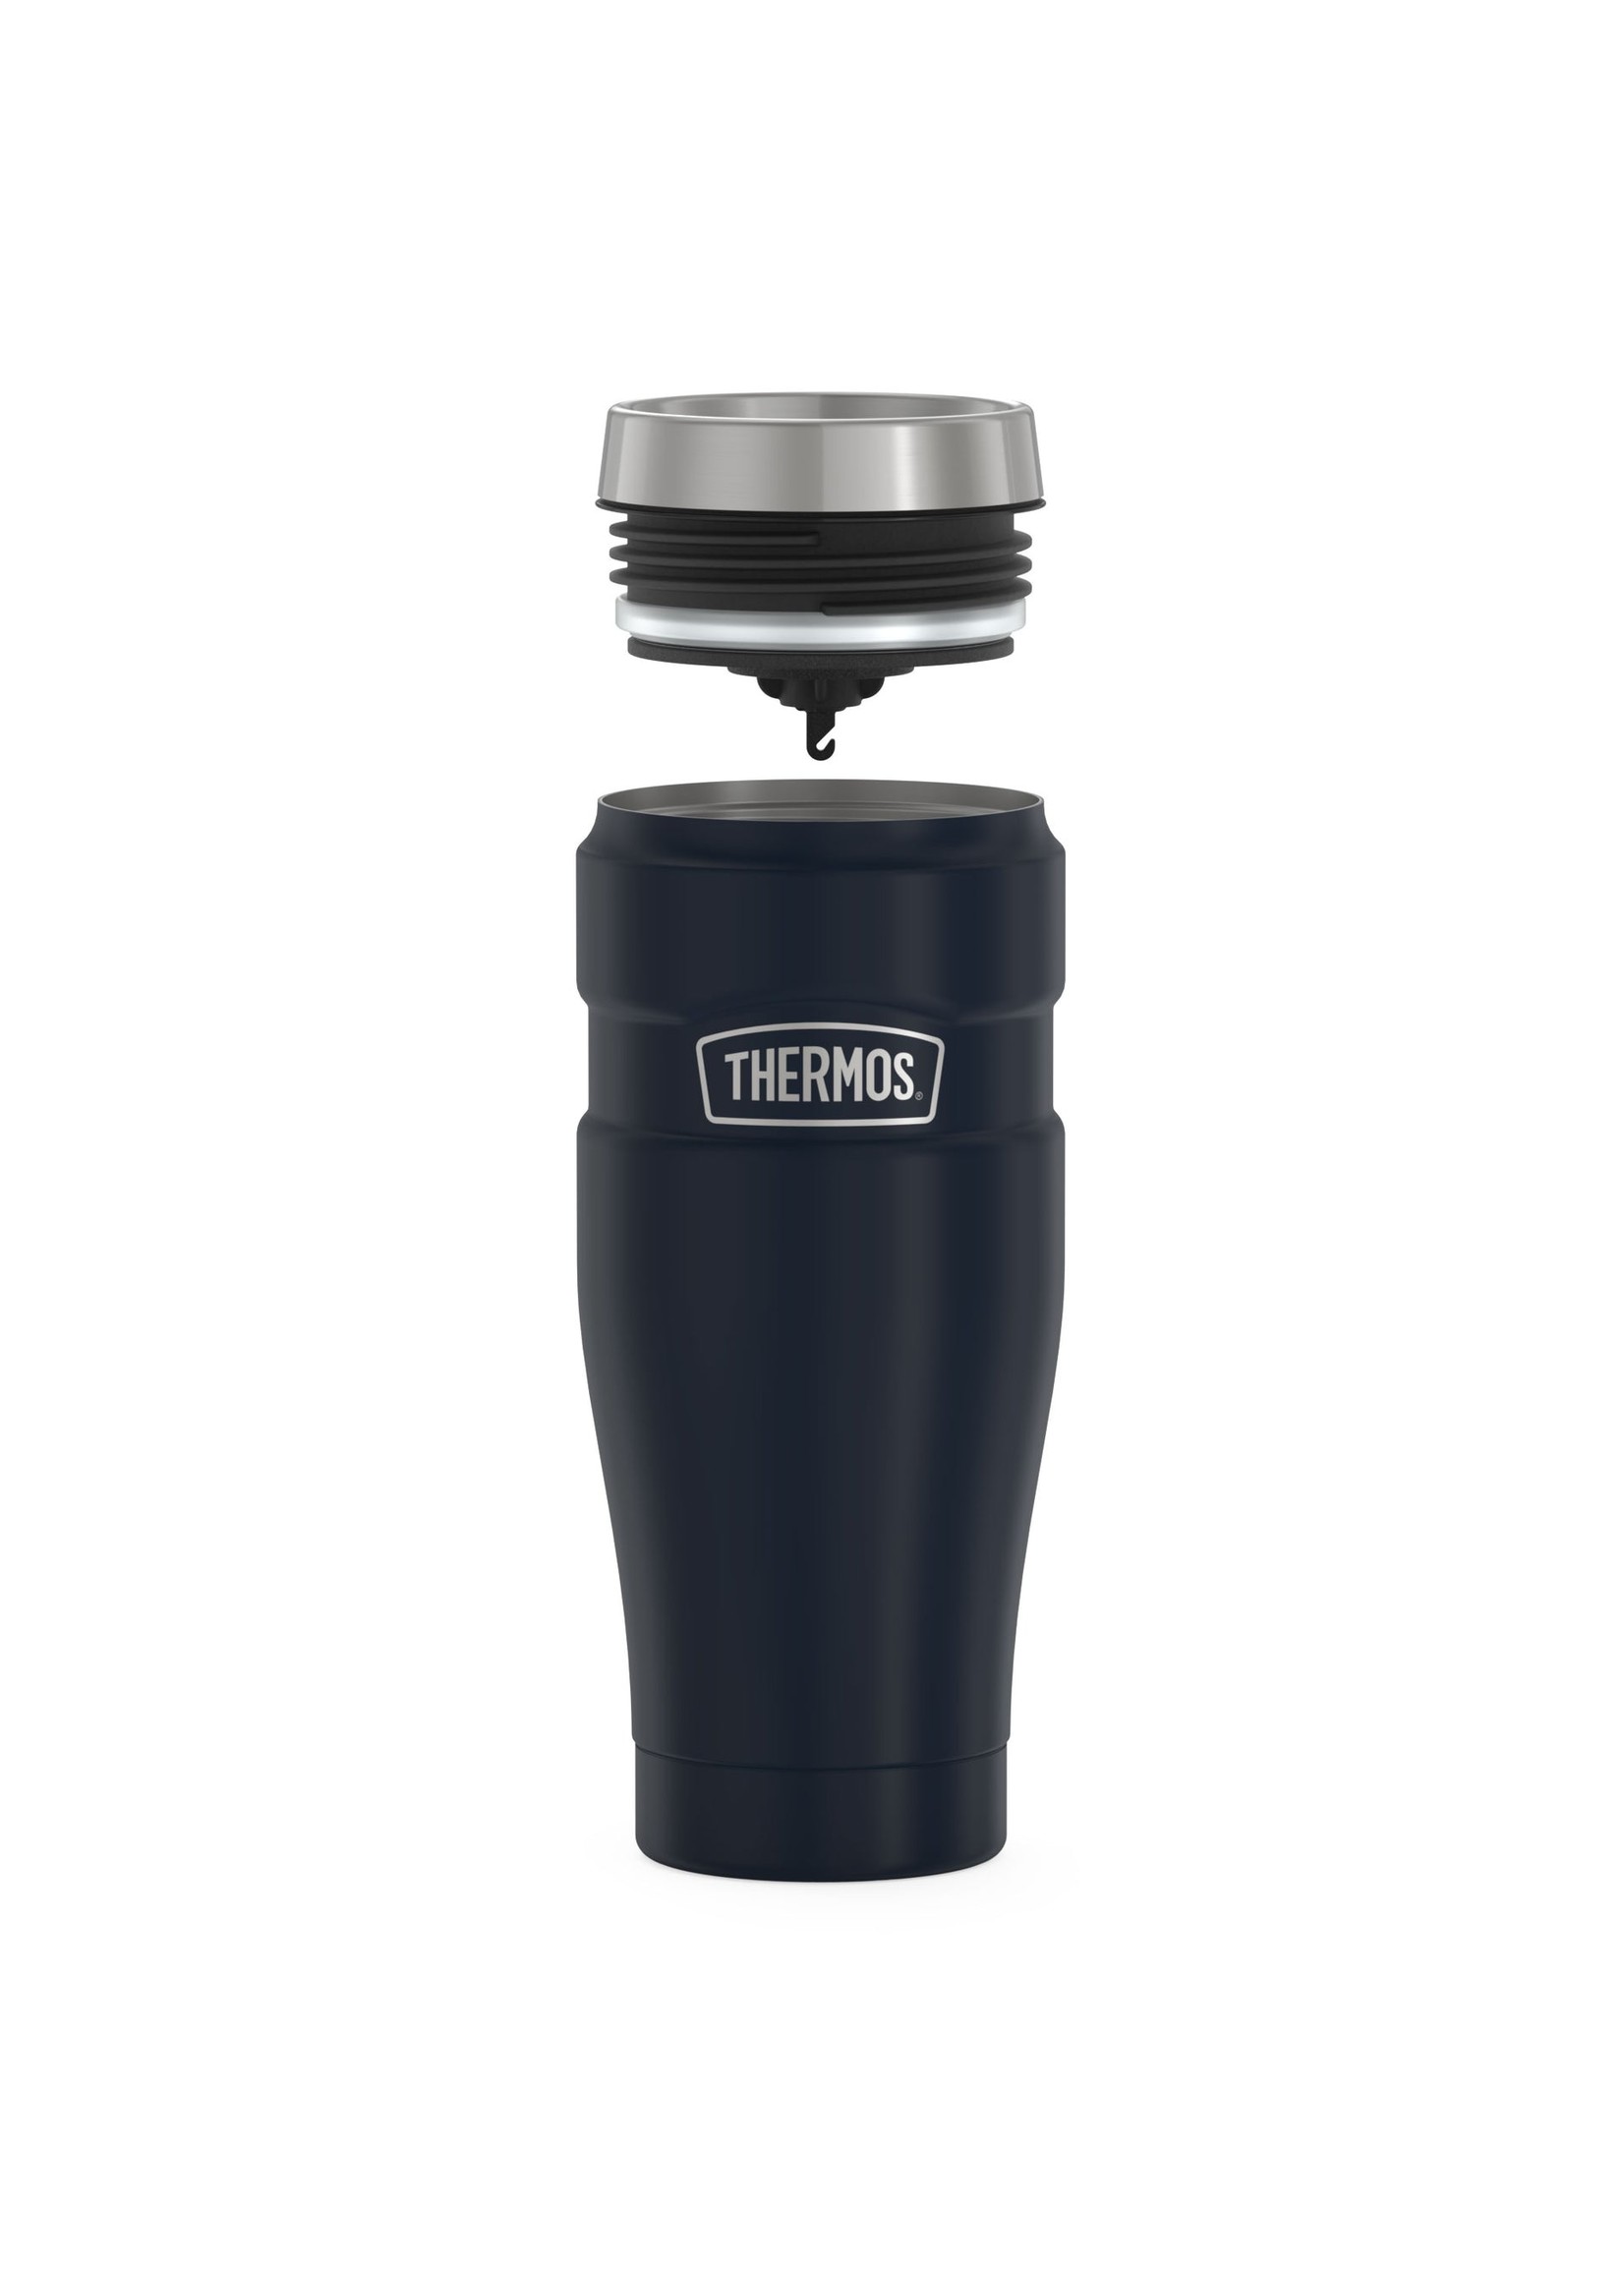 THERMOS Copy of 470ml STAINLESS STEEL TRAVEL TUMBLER MUG